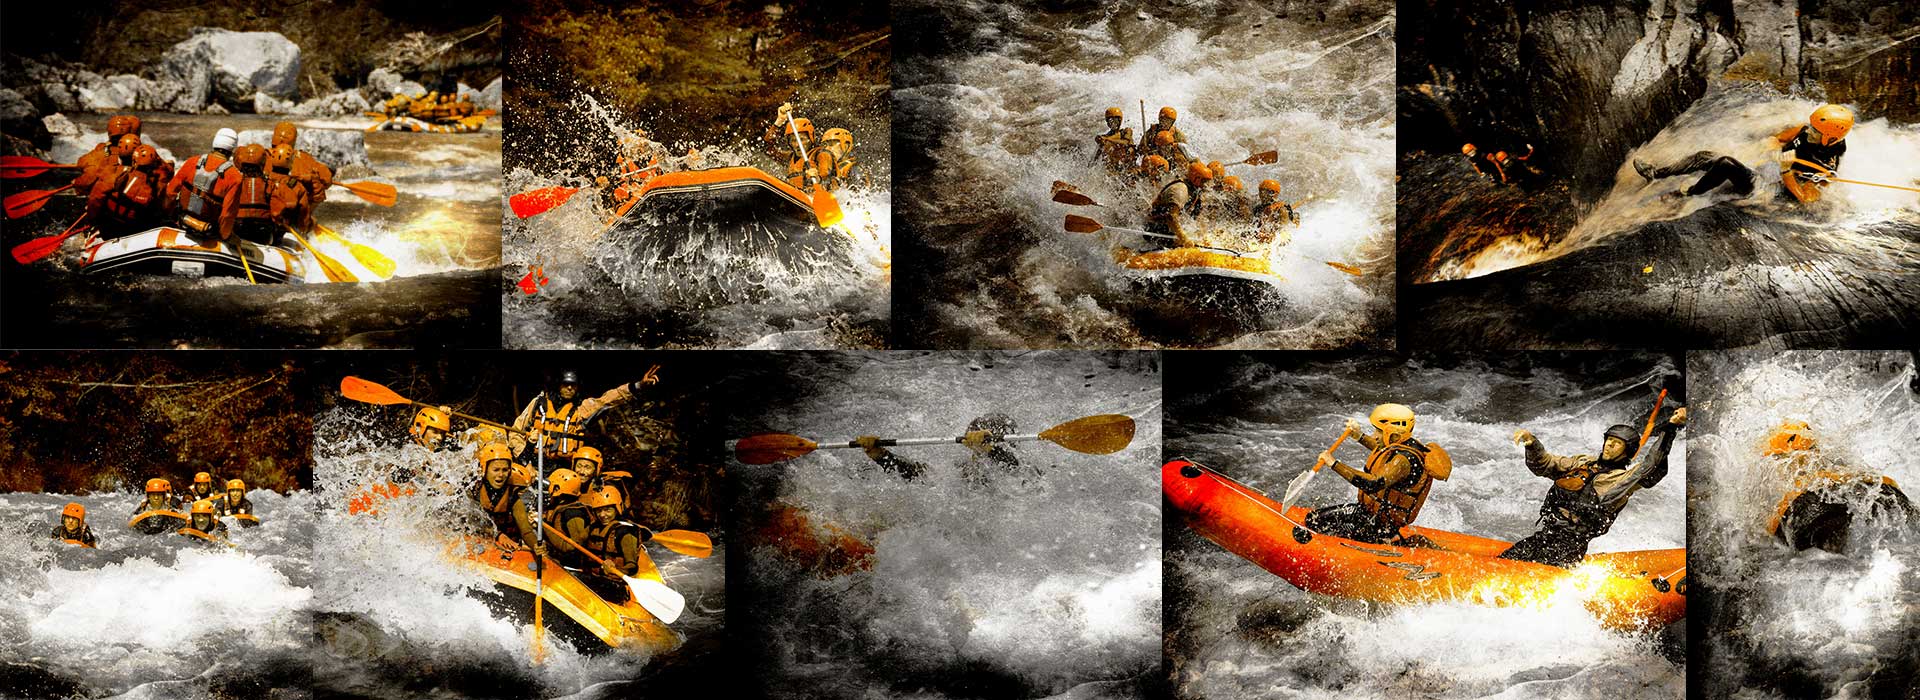 Different images with all the whitewater activities in Bourg-Saint-Maurice